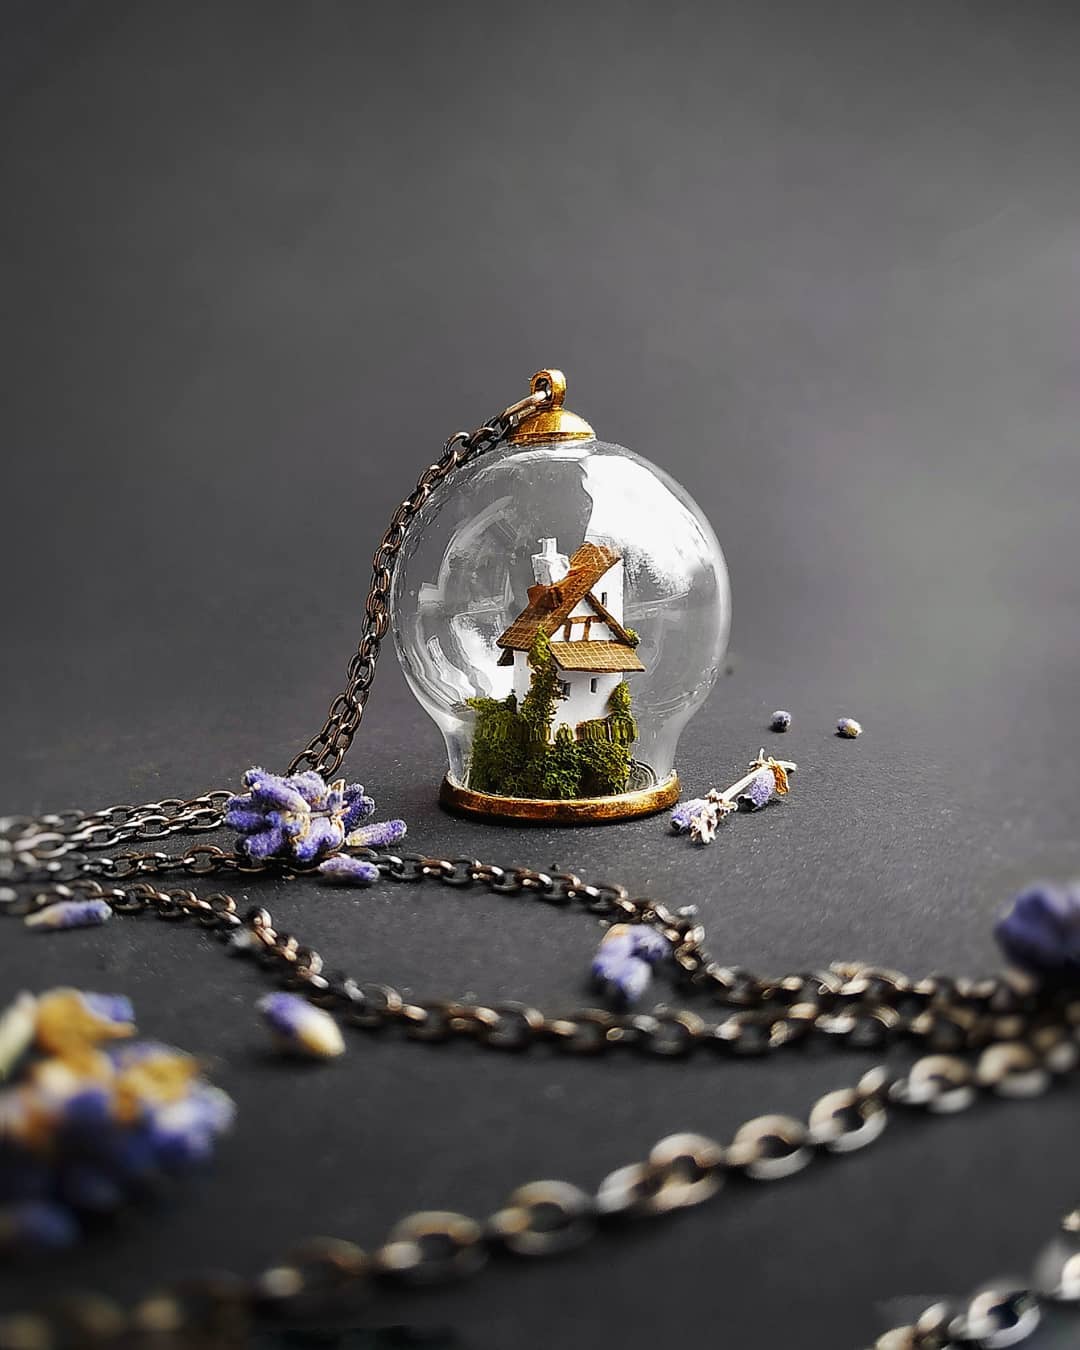 Fantastical Miniatures Encased In Glass Domes By Michael Davydow 5